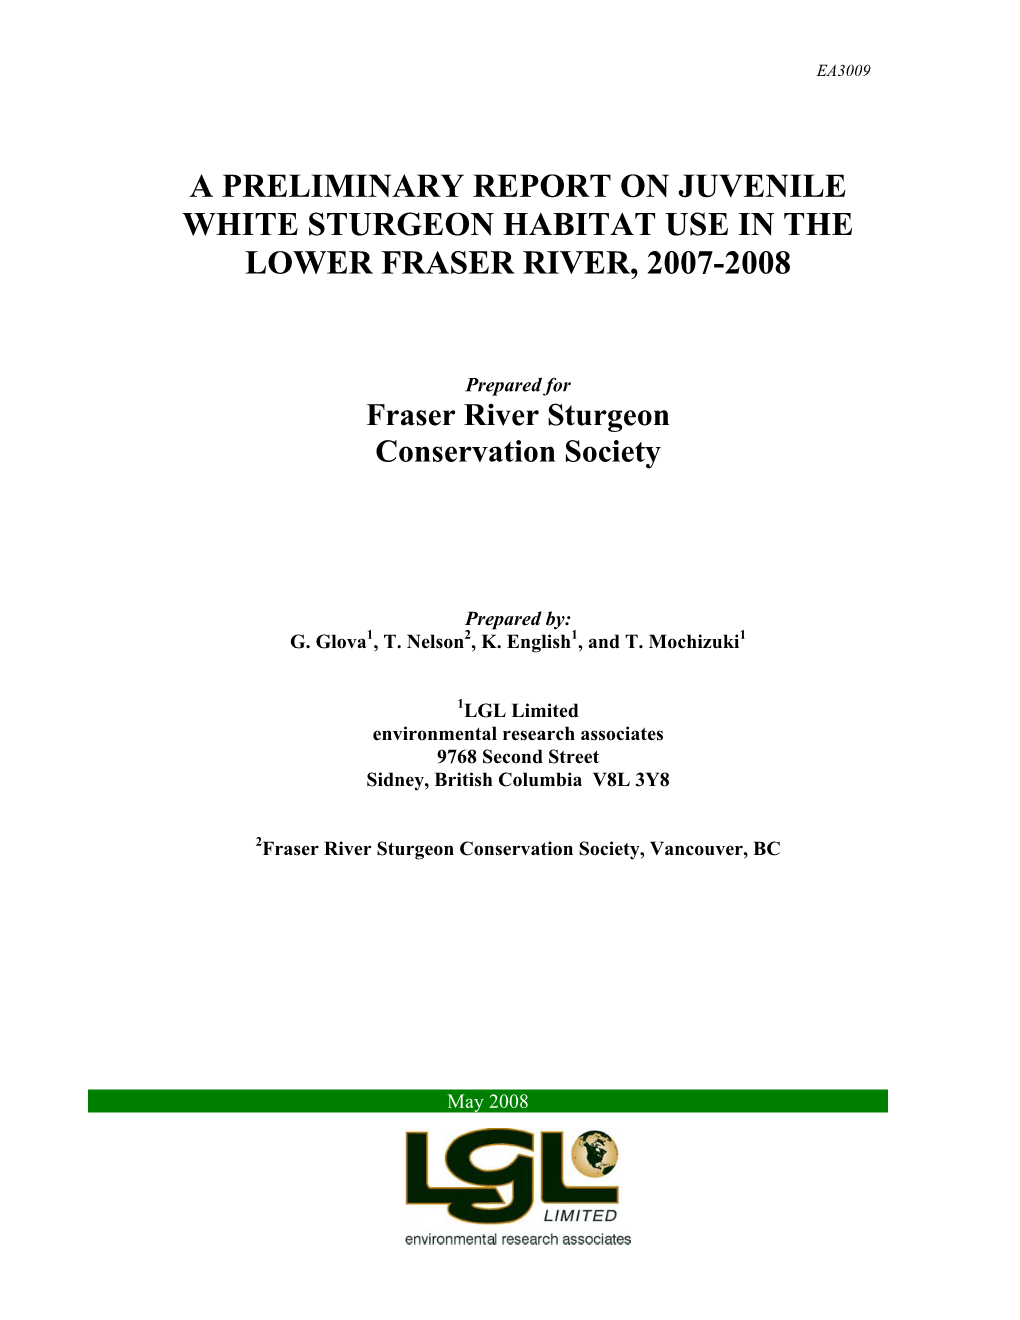 A Preliminary Report on Juvenile White Sturgeon Habitat Use in the Lower Fraser River, 2007-2008